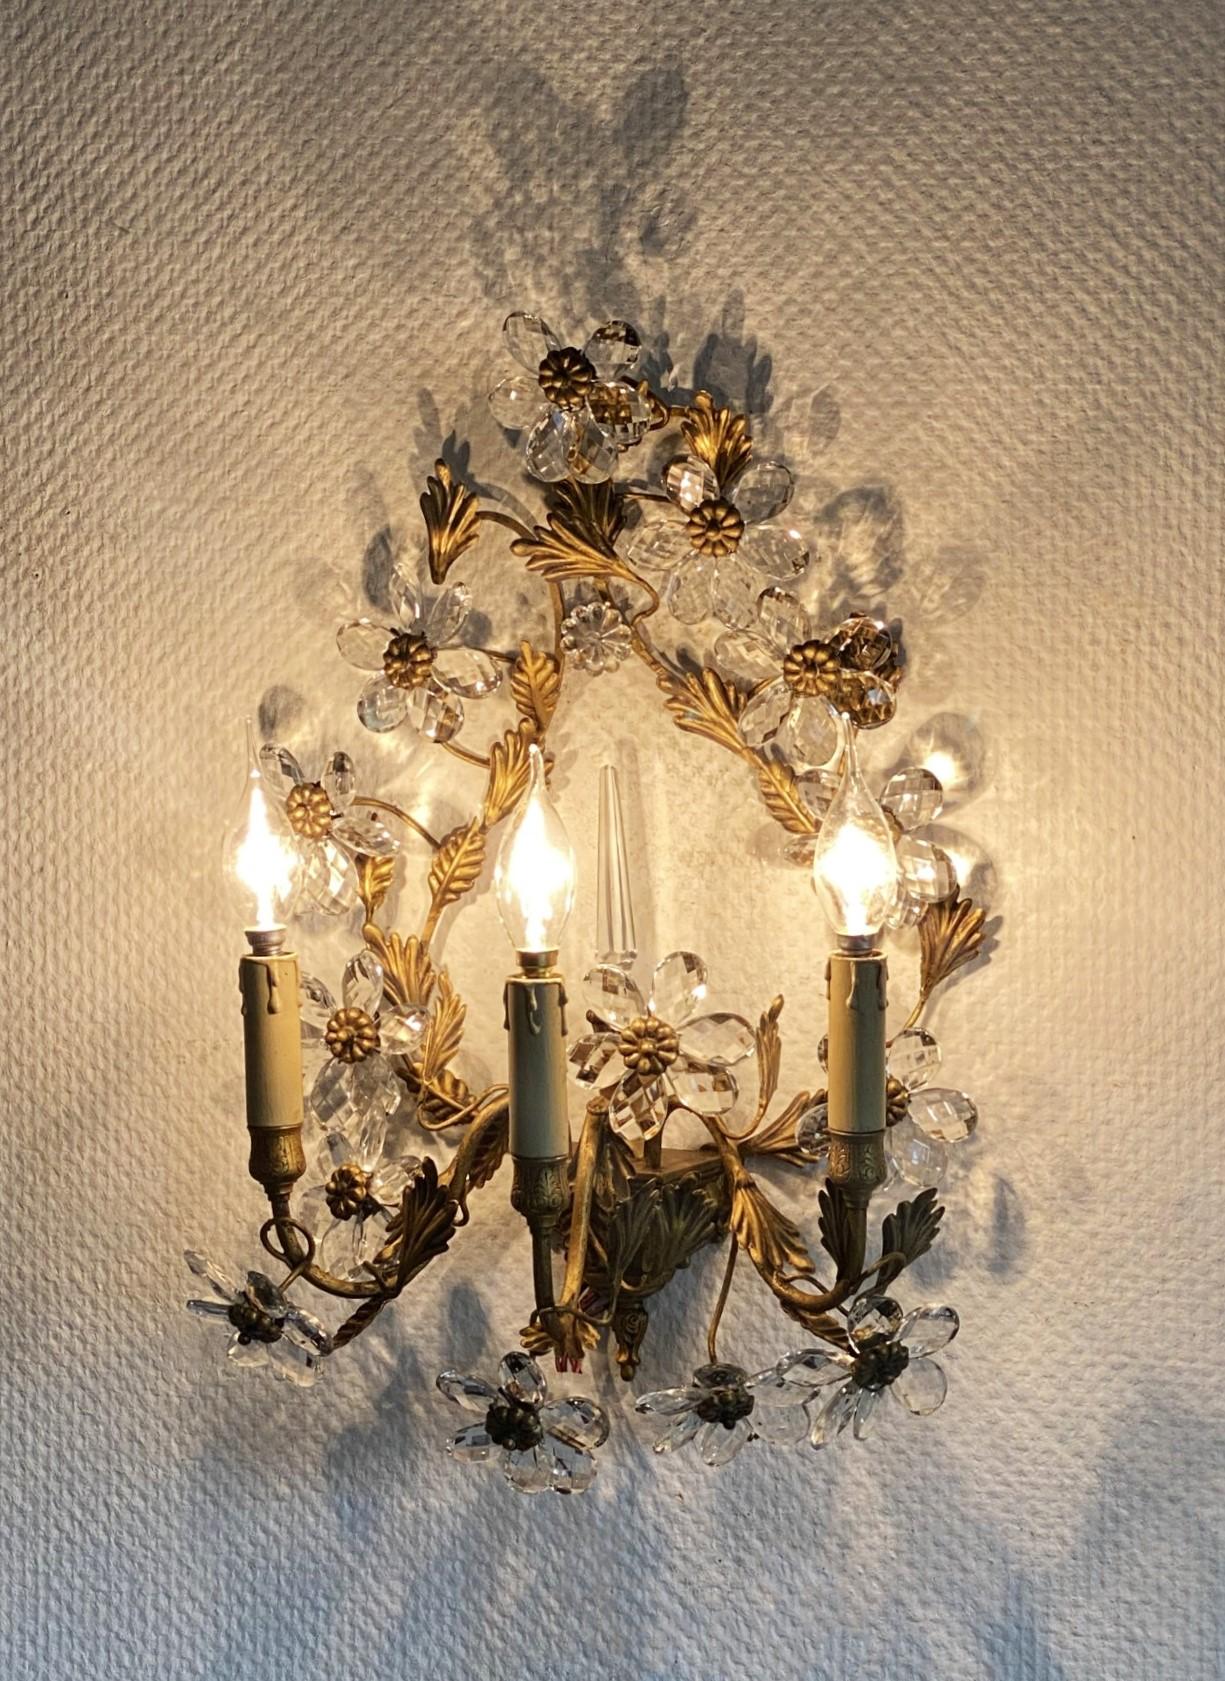 Pair of Large Maison Baguès Wrought Iron Crystal Flower Wall Sconces, 1930s For Sale 3